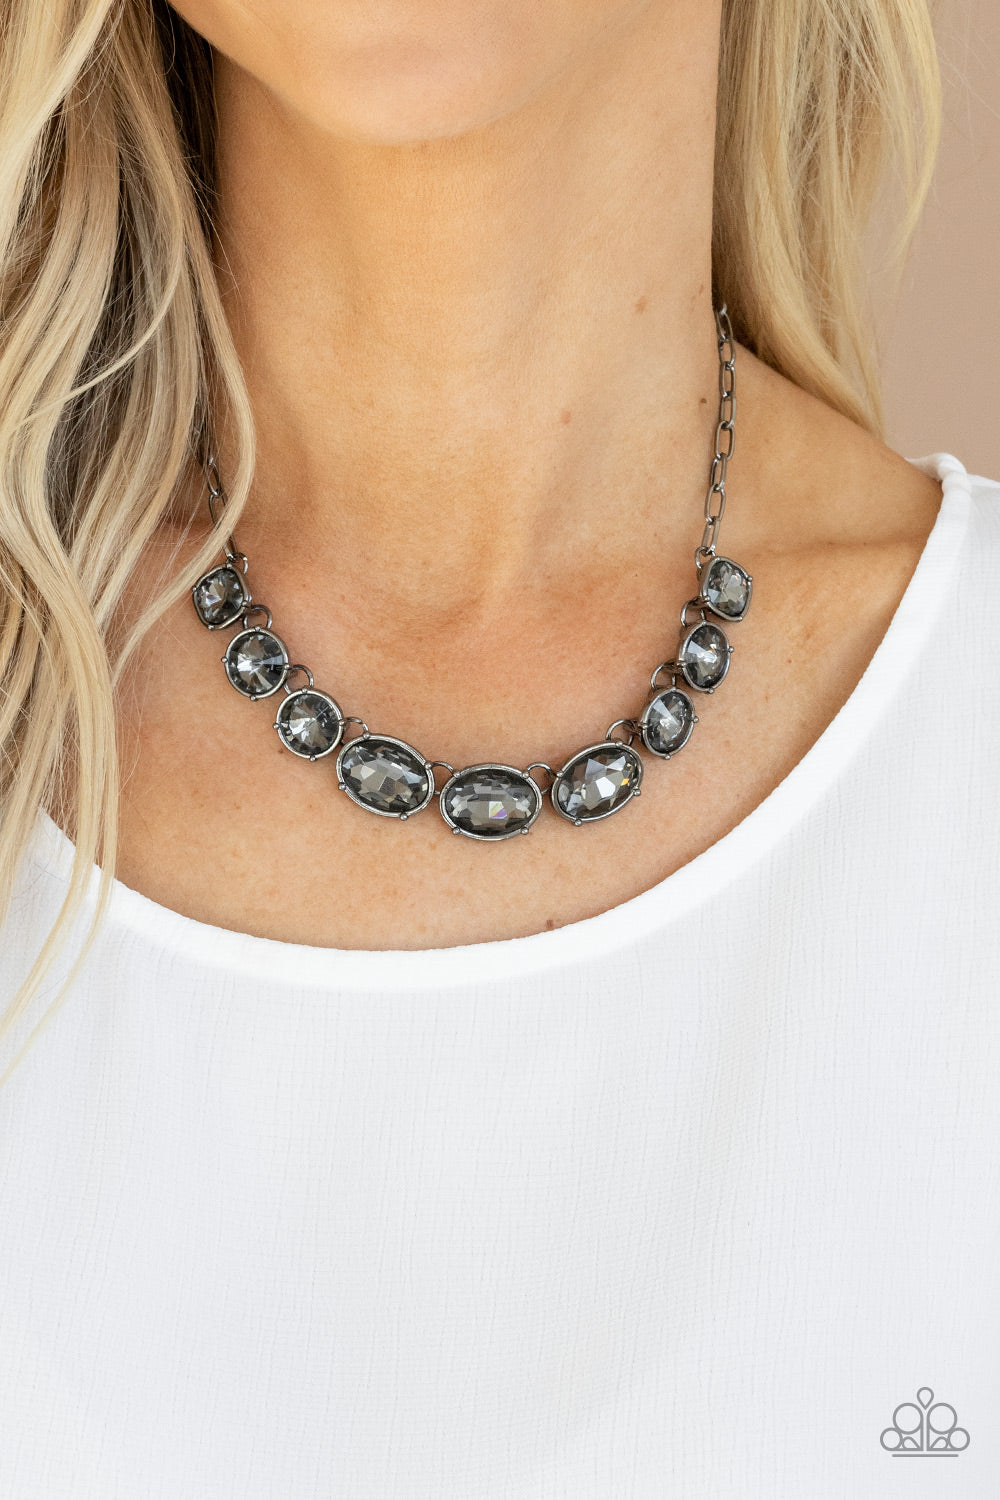 Gorgeously Glacial- Black and Gunmetal Necklace- Paparazzi Accessories